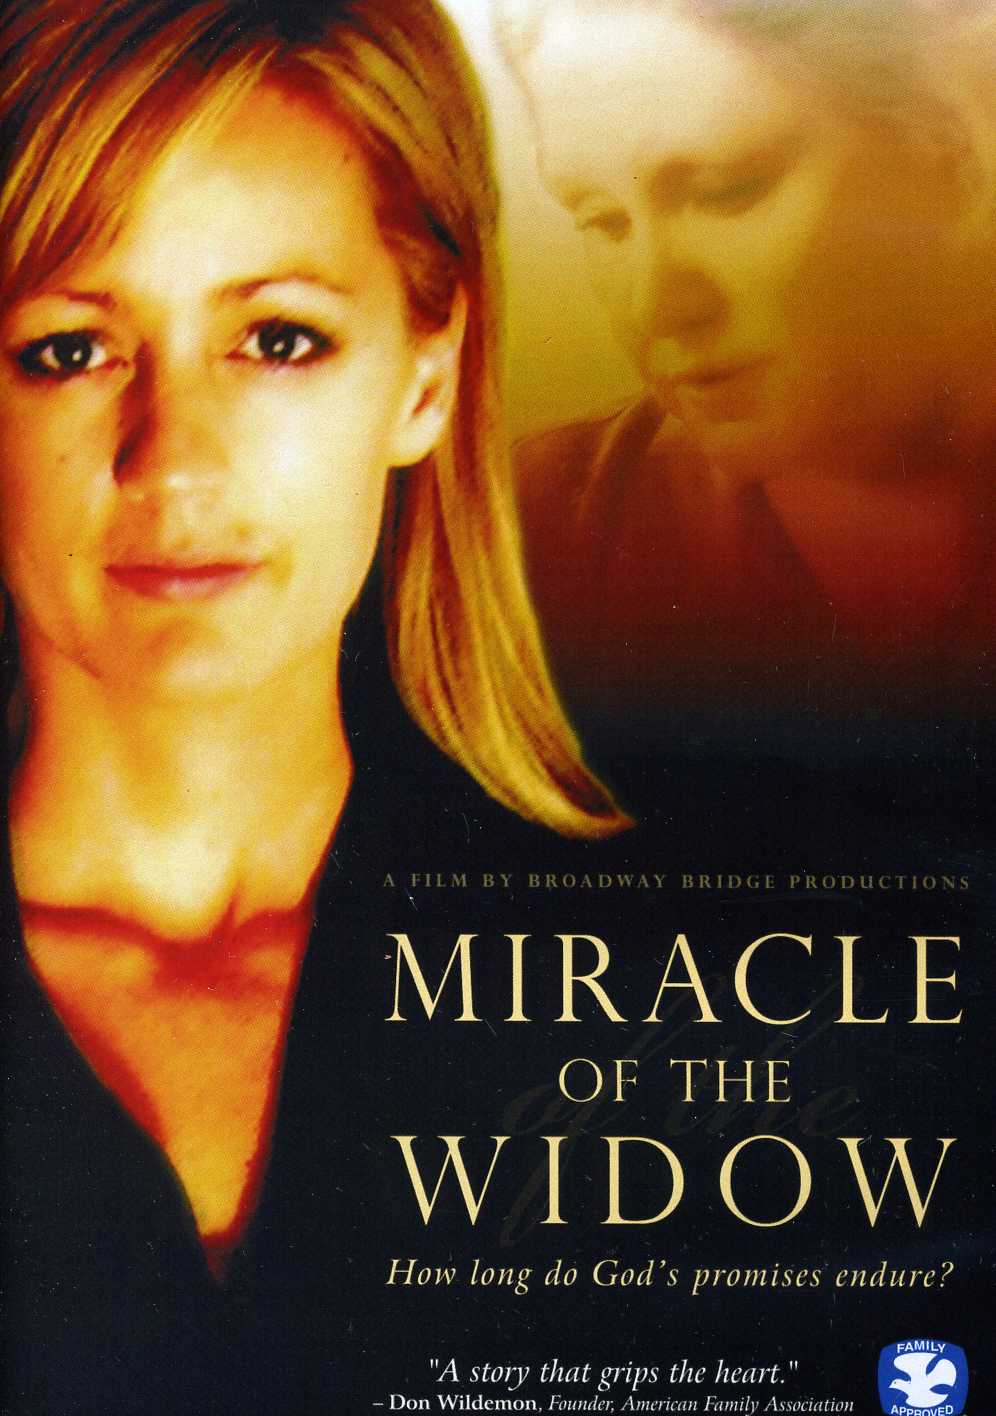 MIRACLE OF THE WIDOW